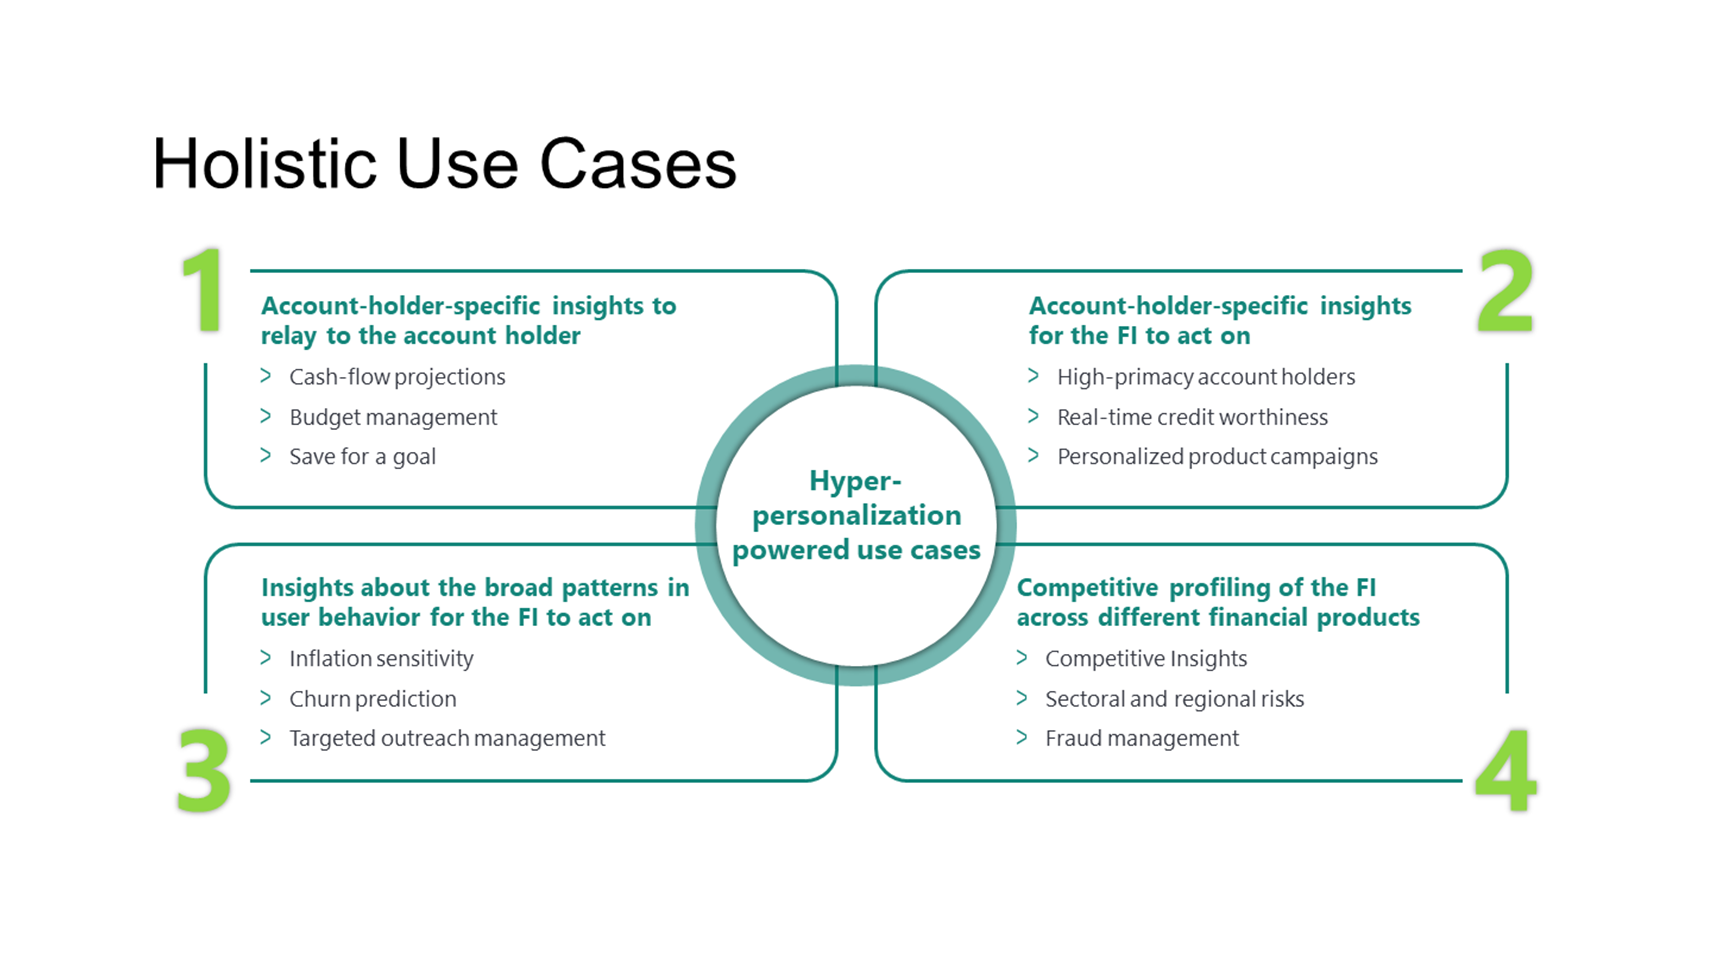 use cases supported by our data science capabilities